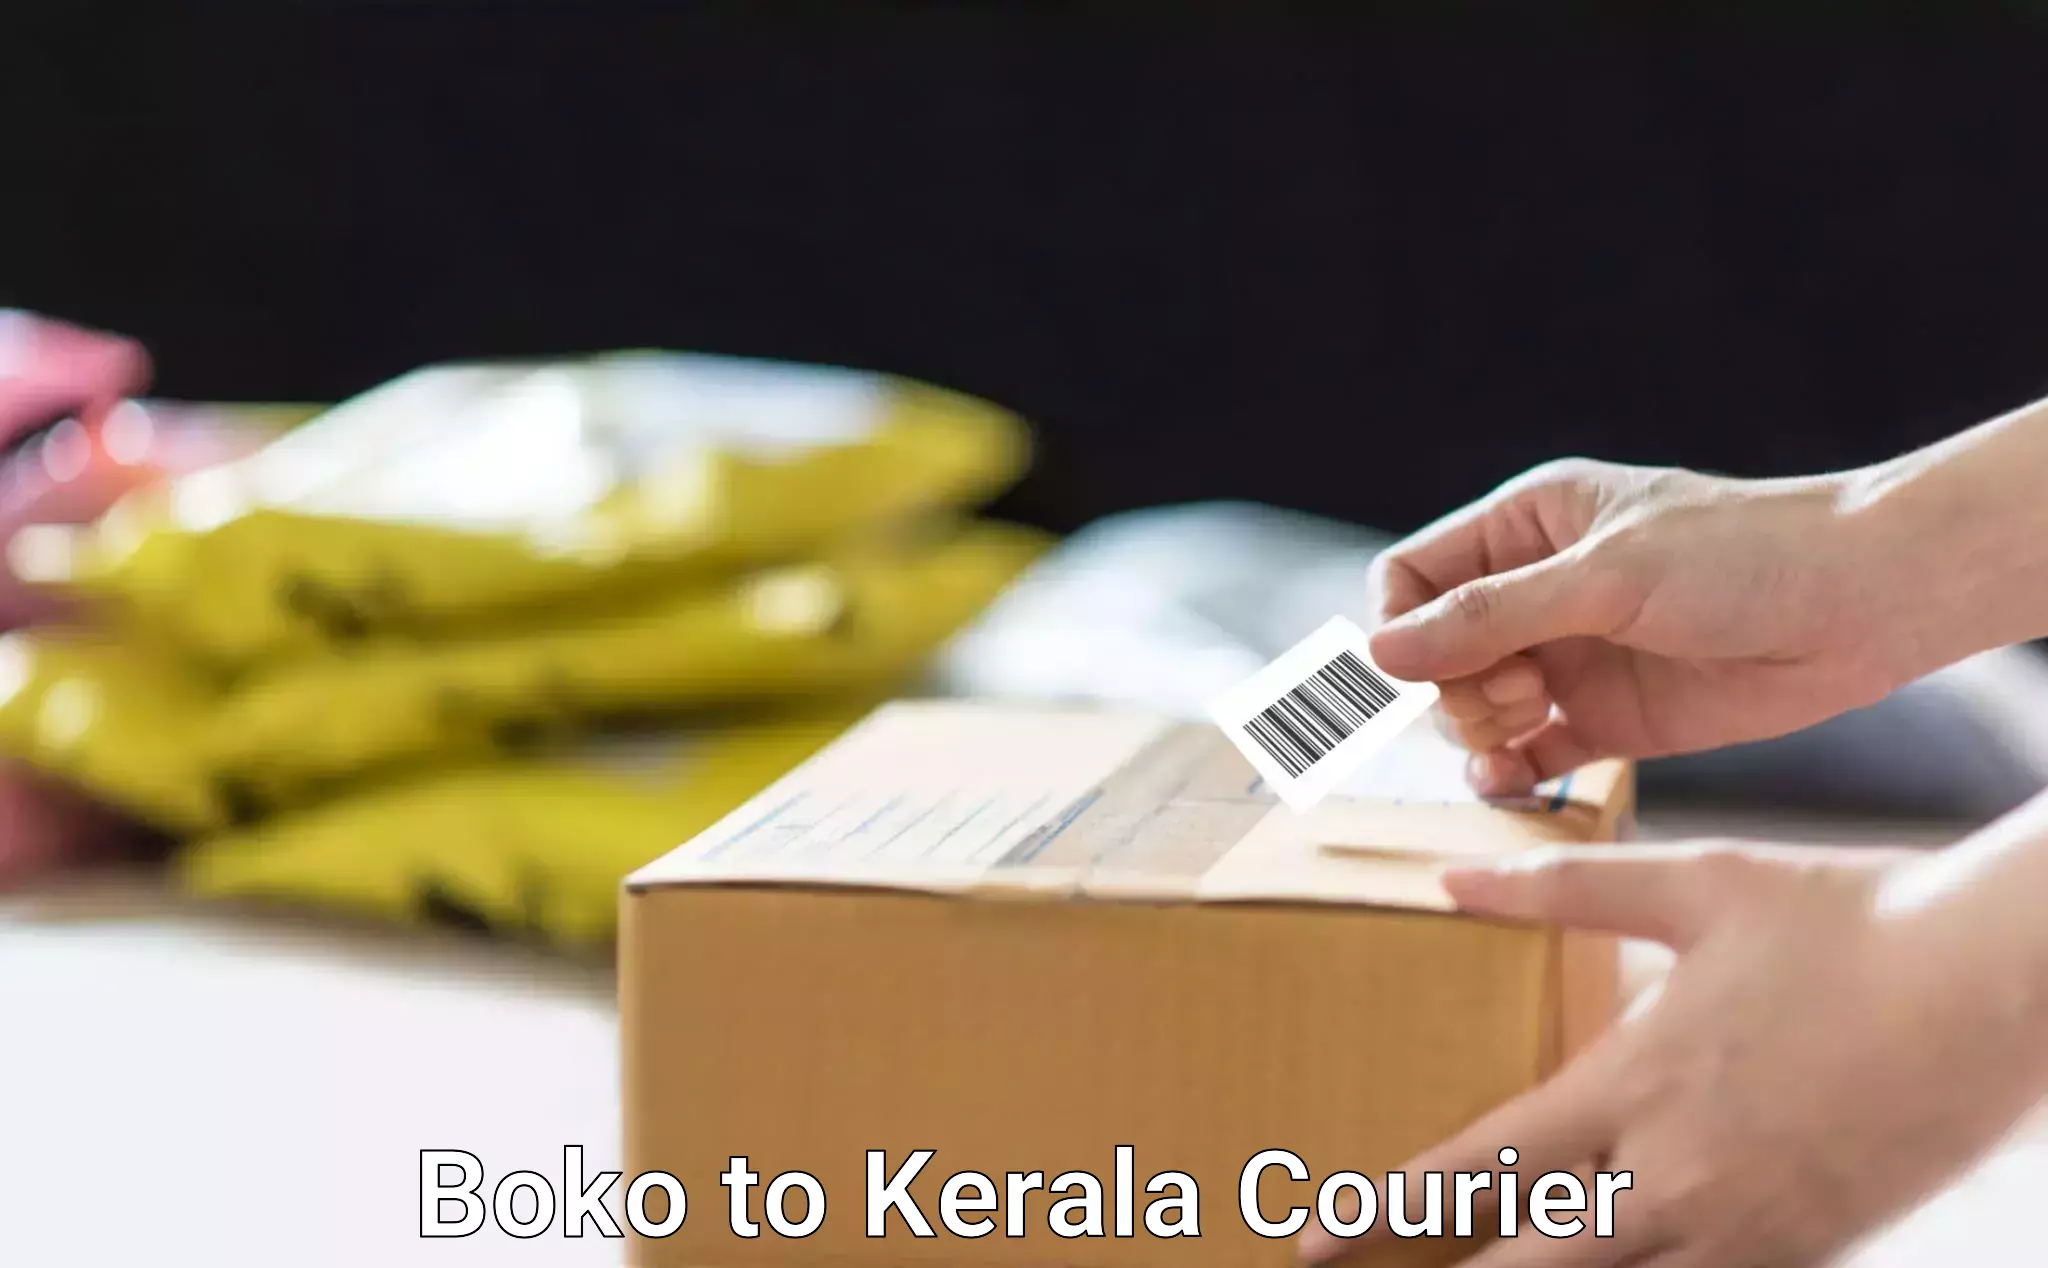 Sustainable shipping practices Boko to Kerala